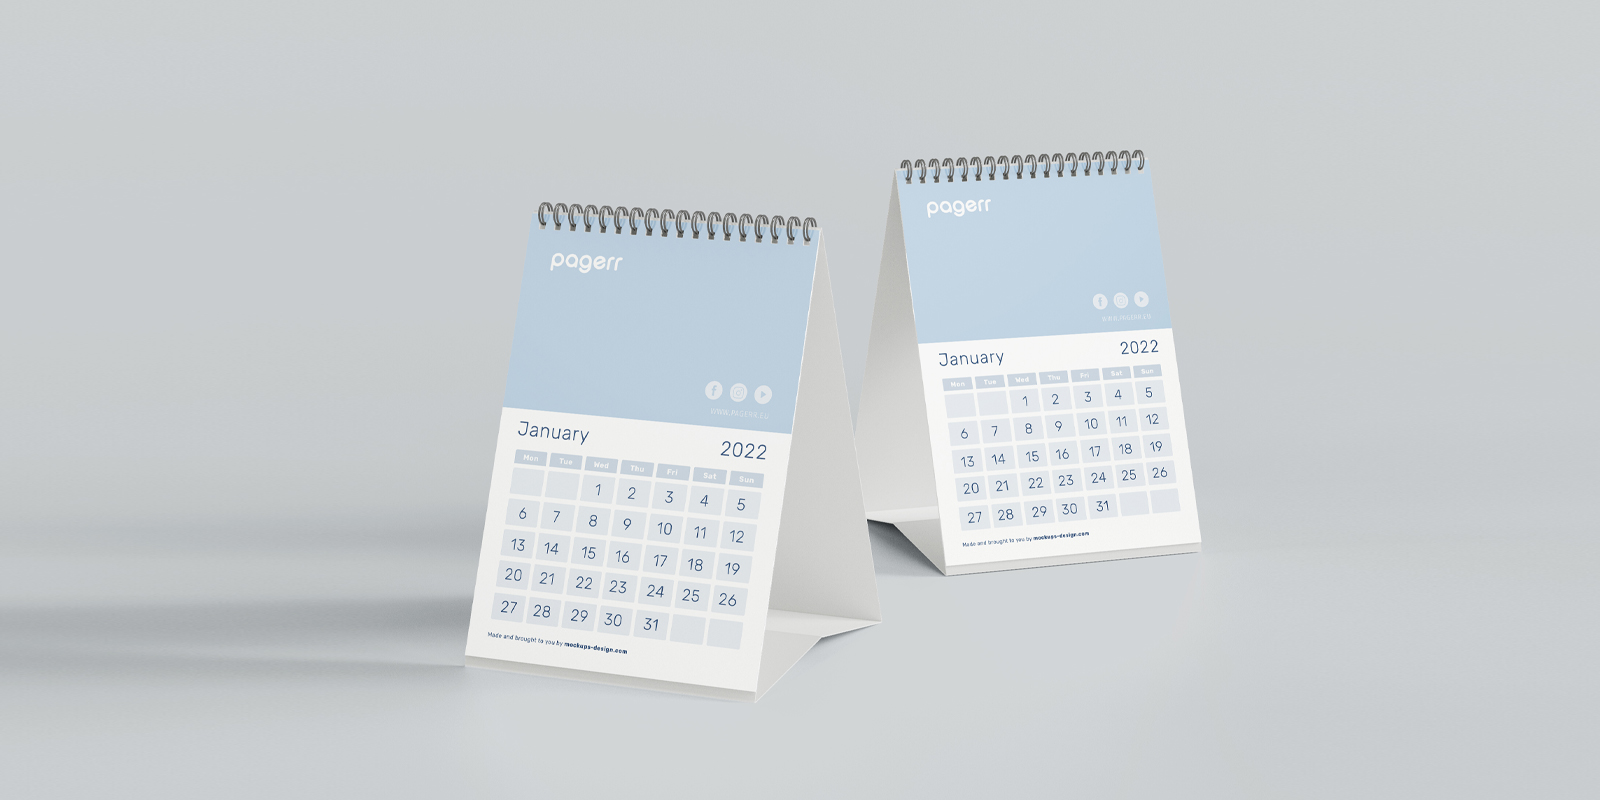 Desk calendars in Seville - Print with Pagerr